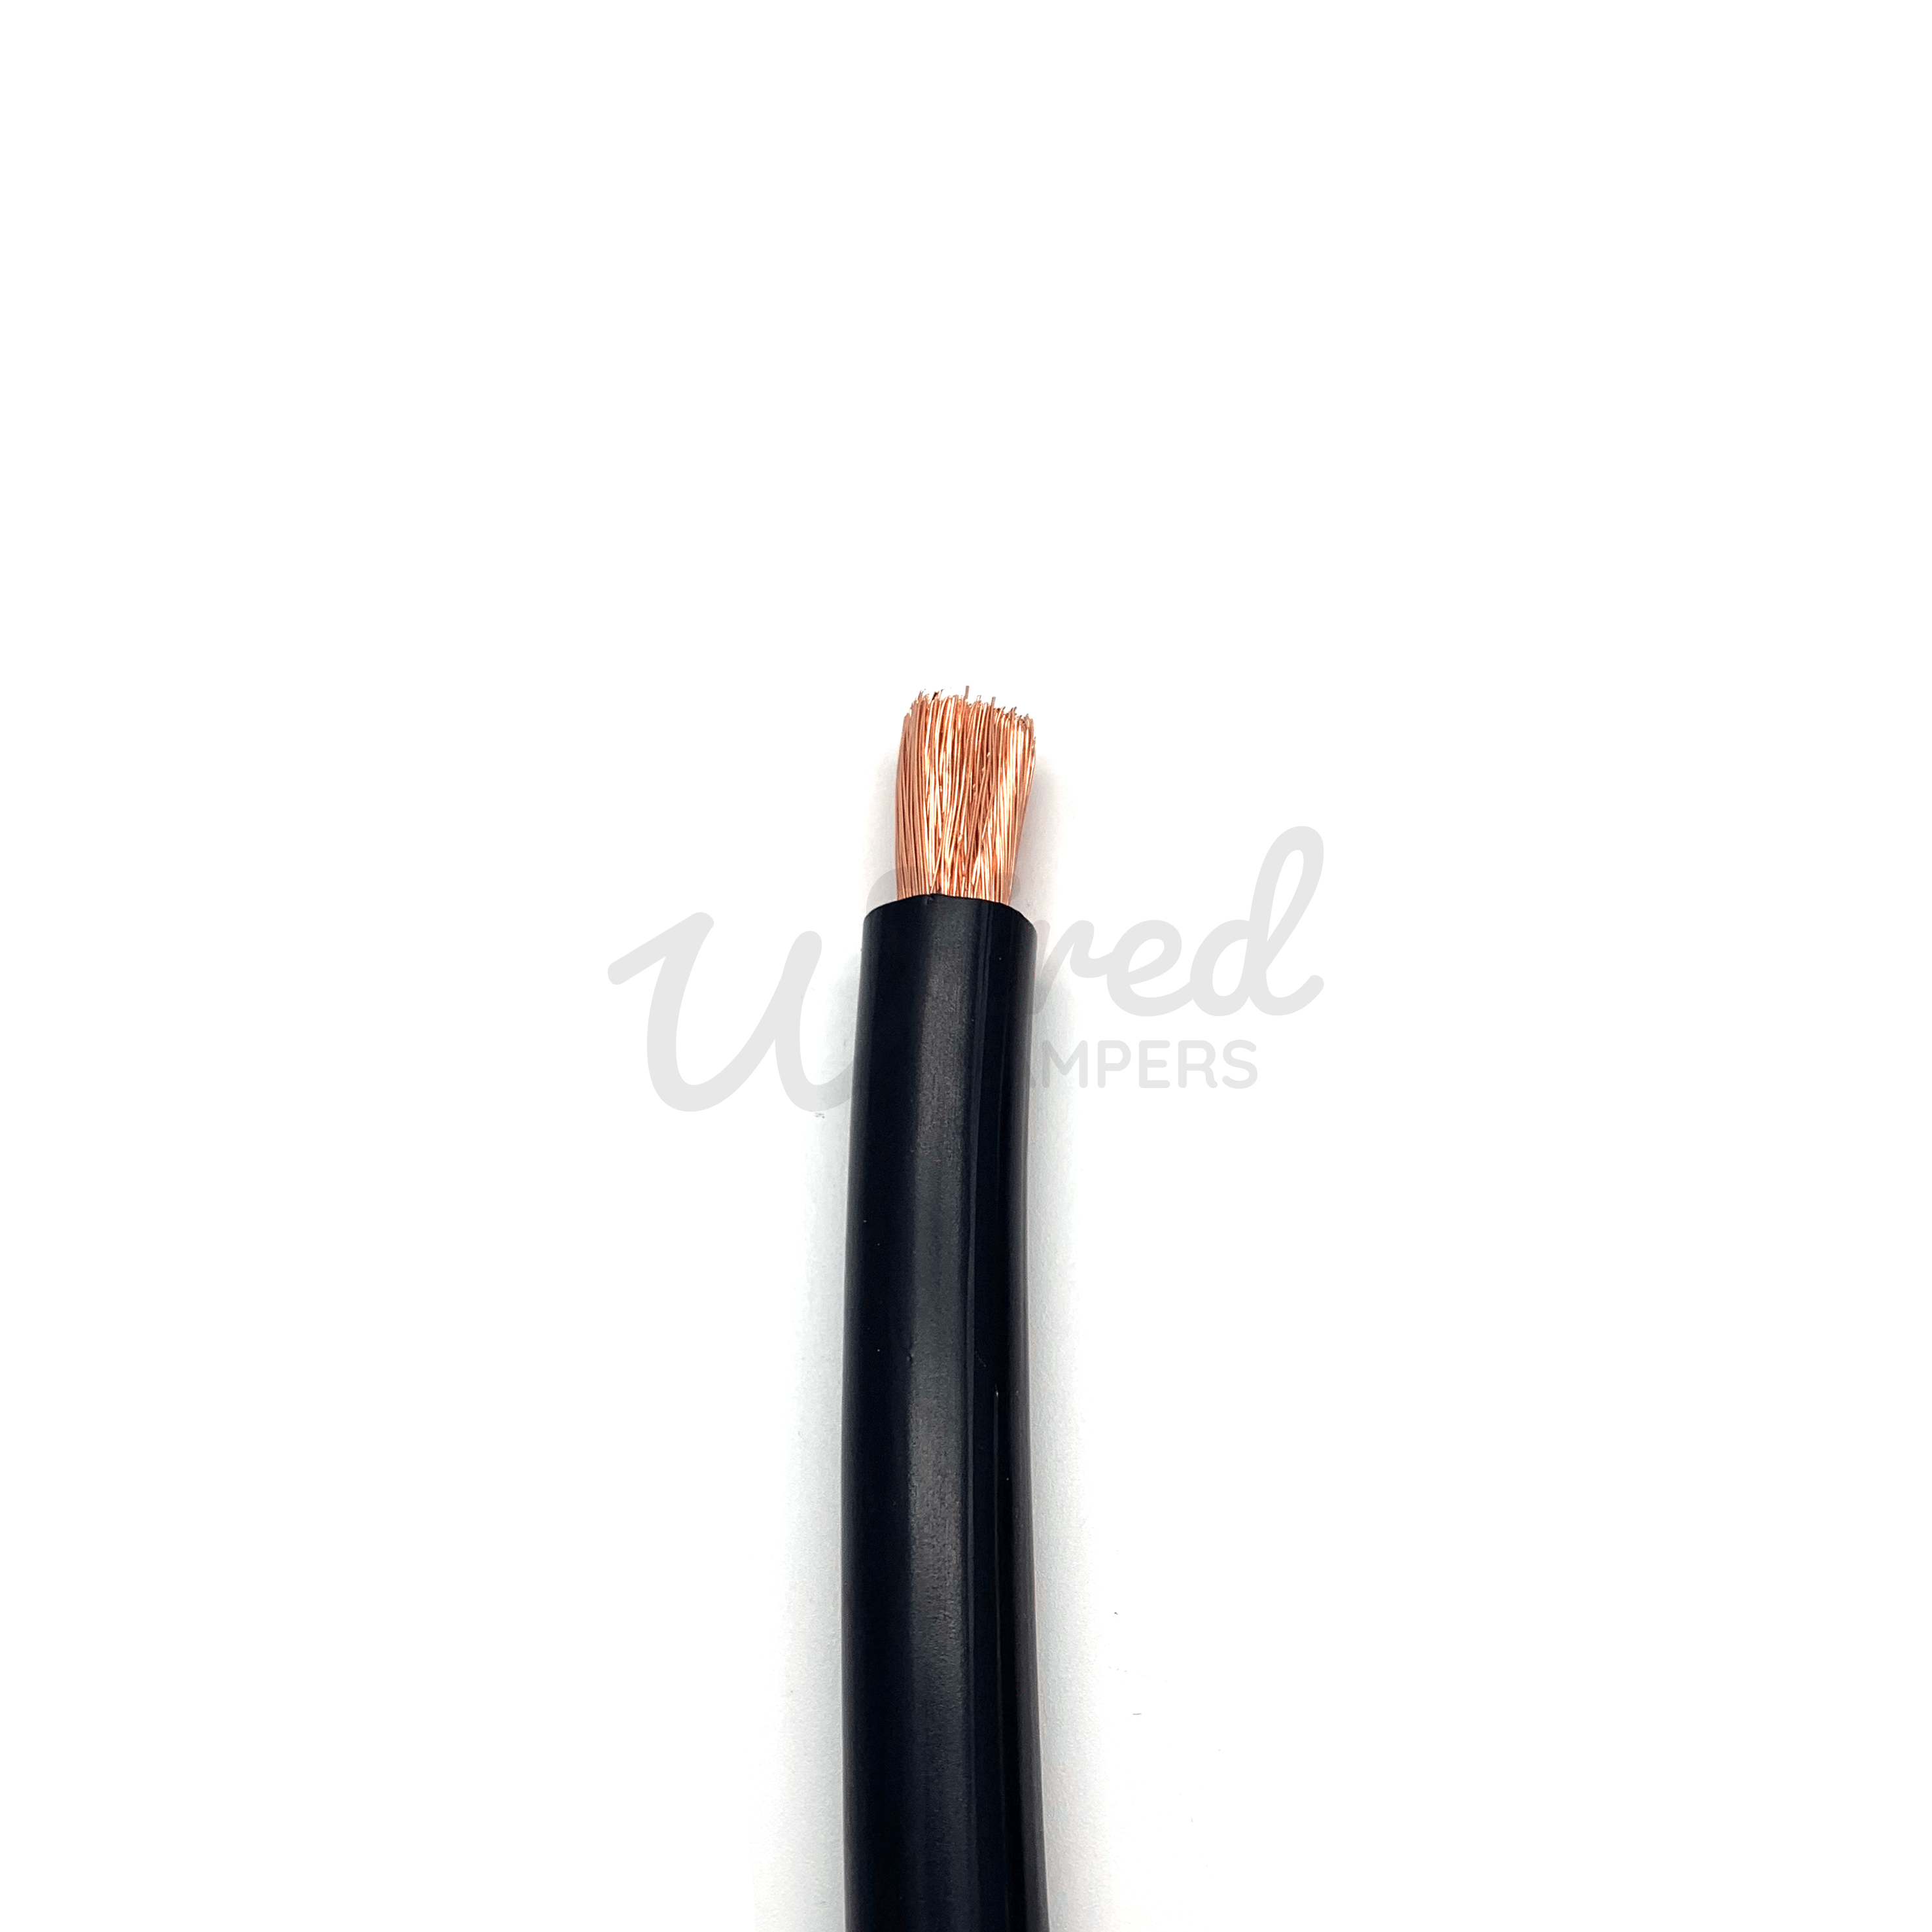 Wired Campers Limited 10M - 25mm² 170A Hi-Flex Battery/Welding/Inverter Flexible Cable - Black Negative